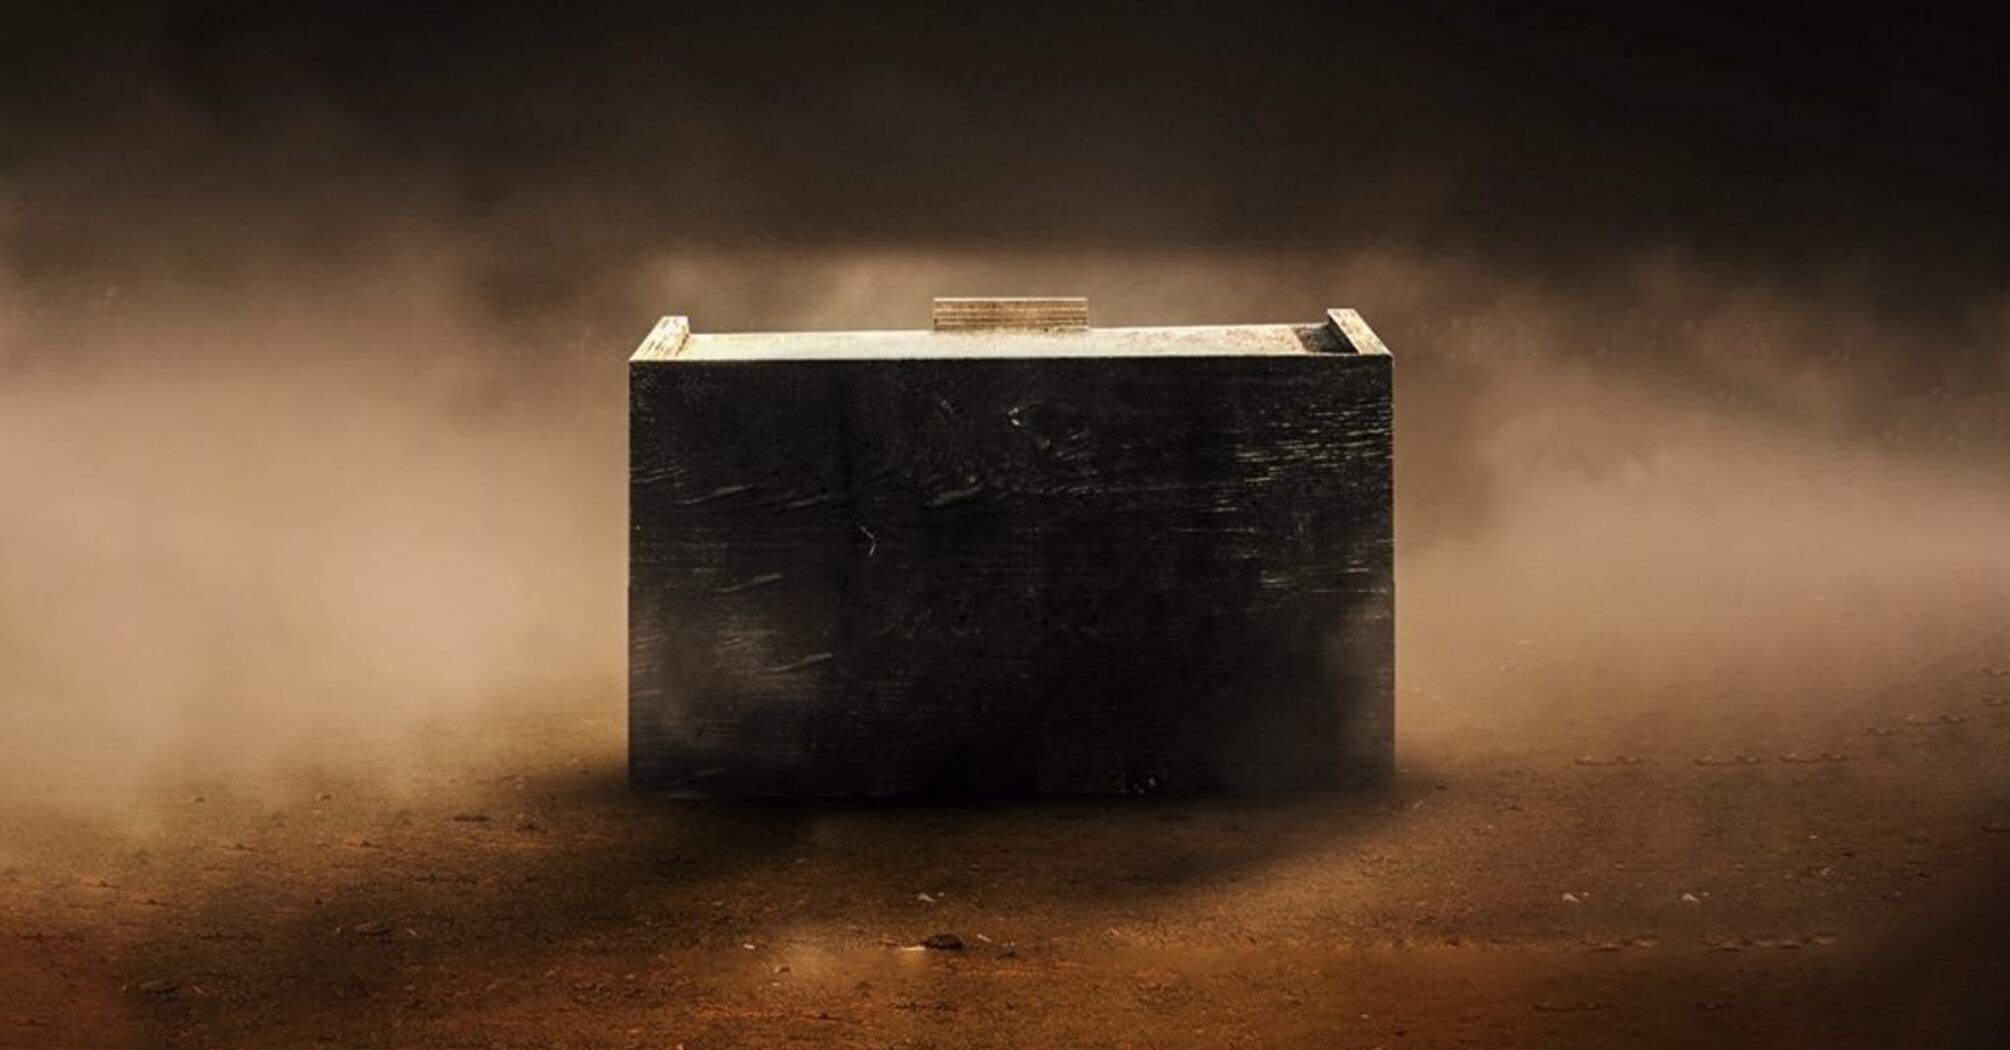 A man found a strange black box in the basement of his old house